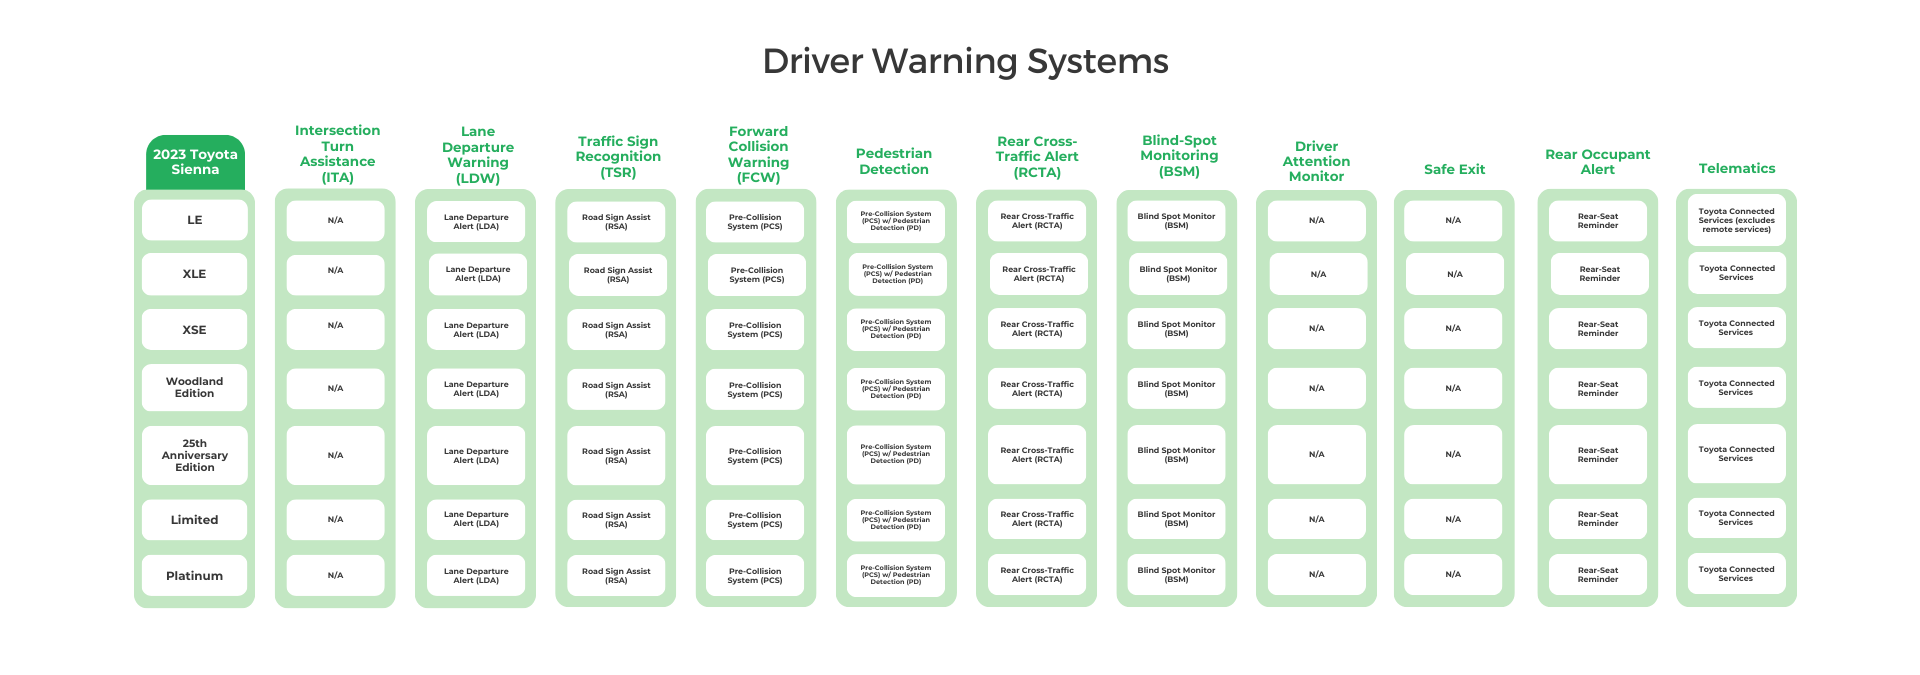 2023 Toyota Sienna Driver Warning Systems